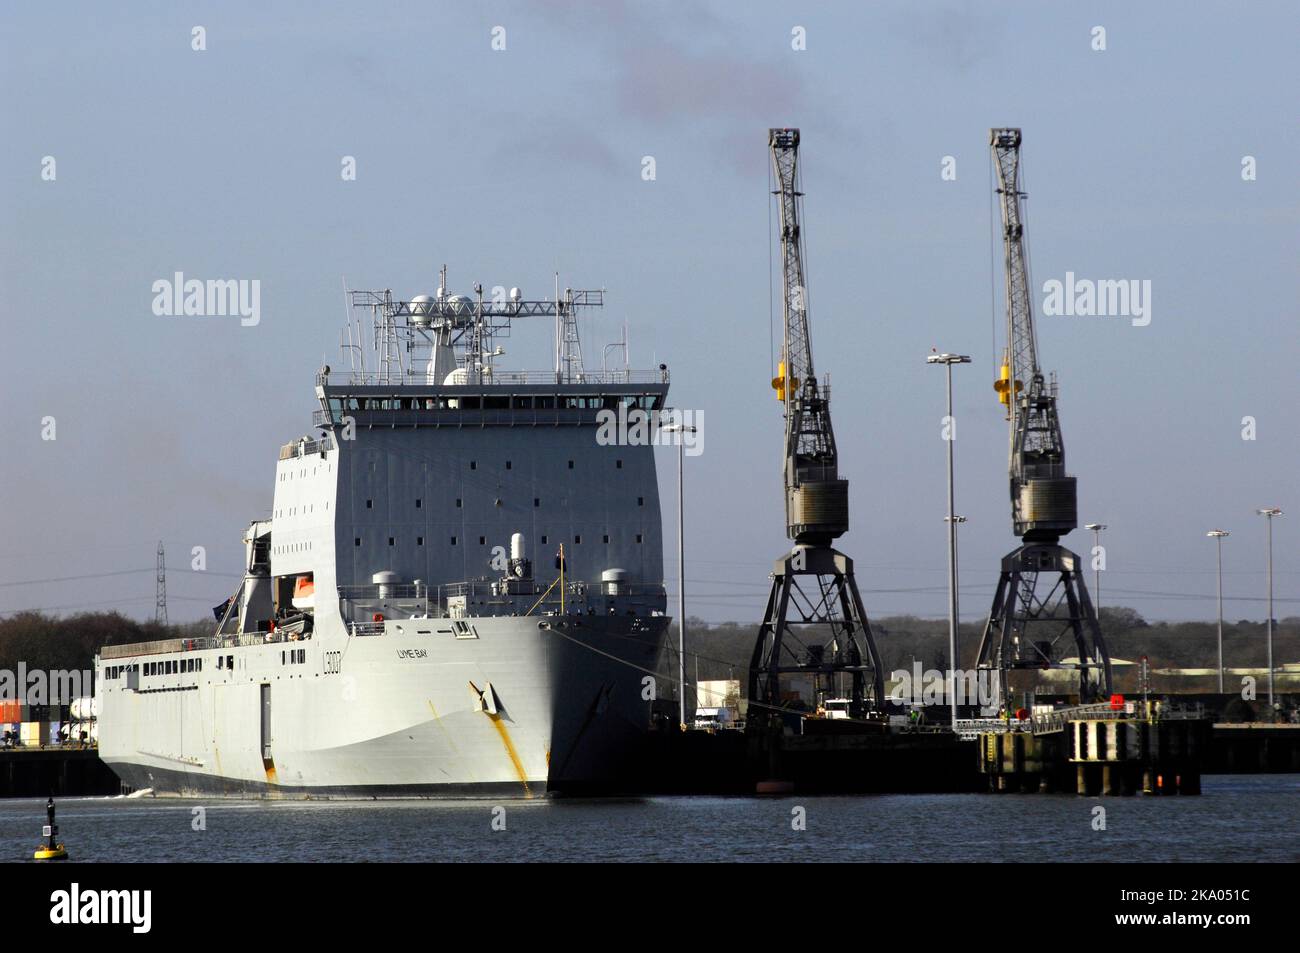 AJAXNETPHOTO. 22ND FEB, 2014. MARCHWOOD, SOUTHAMPTON, ENGLAND. - RFA SHIP AT MARCHWOOD - RFA LYME BAY DOCKED ALONGSIDE AT THE MARCHWOOD BASE. LYME BAY (L3007) IS A BAY CLASS AUXILLIARY LANDING SHIP DOCK (LSD(A)), THE LAST OF HER CLASS TO ENTER SERVICE IN 2007. PHOTO:JONATHAN EASTLAND/AJAX REF:D142202 4039 Stock Photo